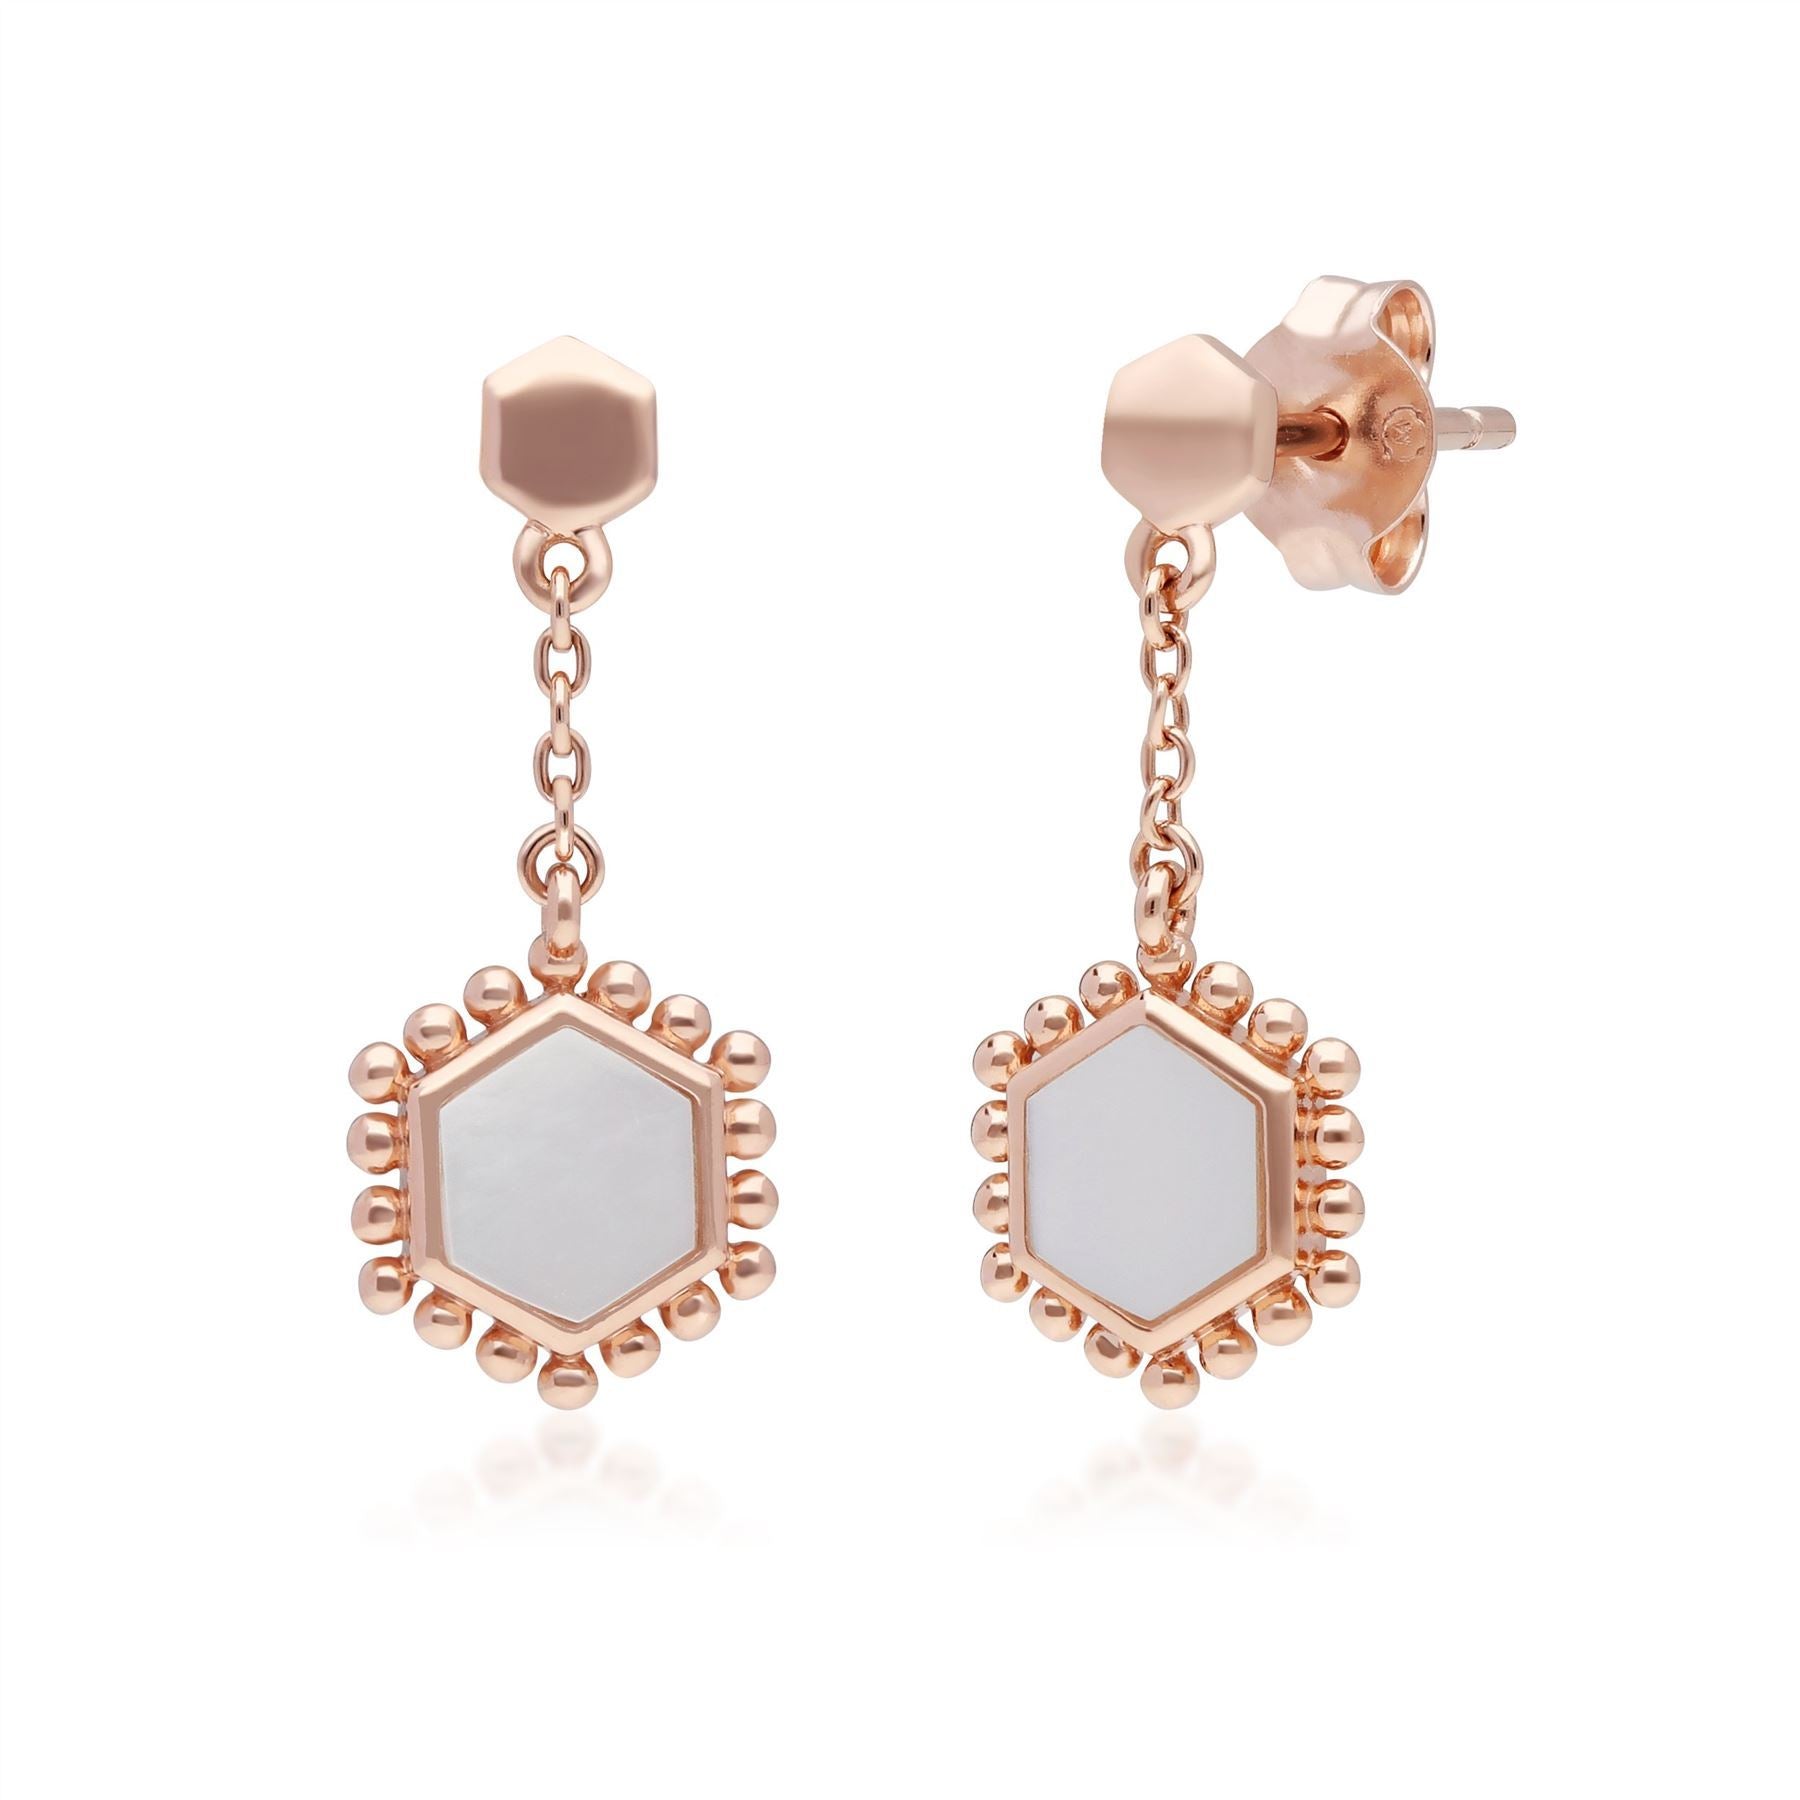 Mother of Pearl Slice Chain Drop Earrings in Rose Gold Plated 925 Sterling Silver